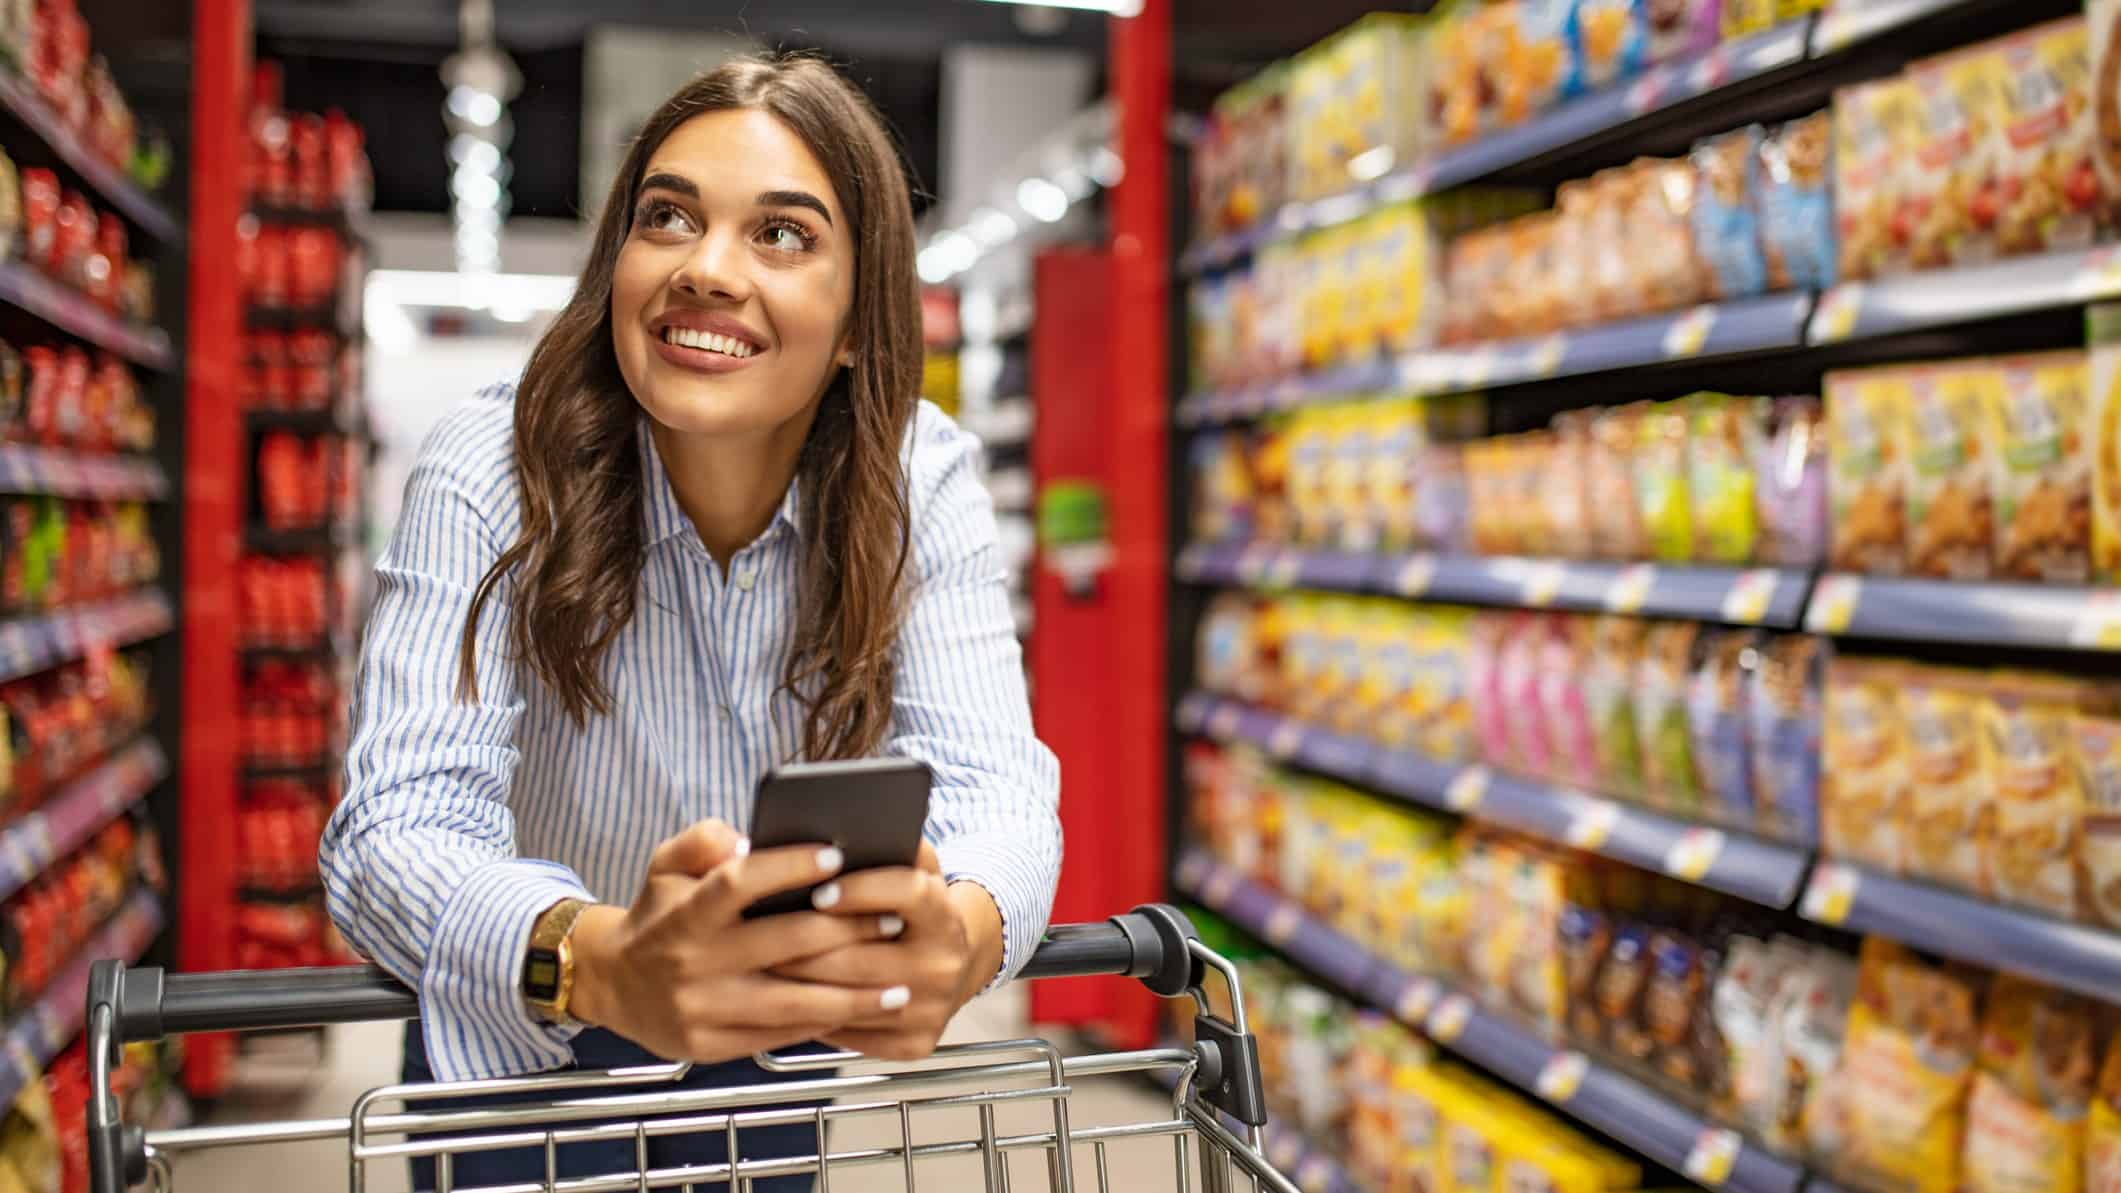 a woman smiles widely as she leans on her trolley while making her way down a supermarket grocery aisle while holding her mobile telephone.